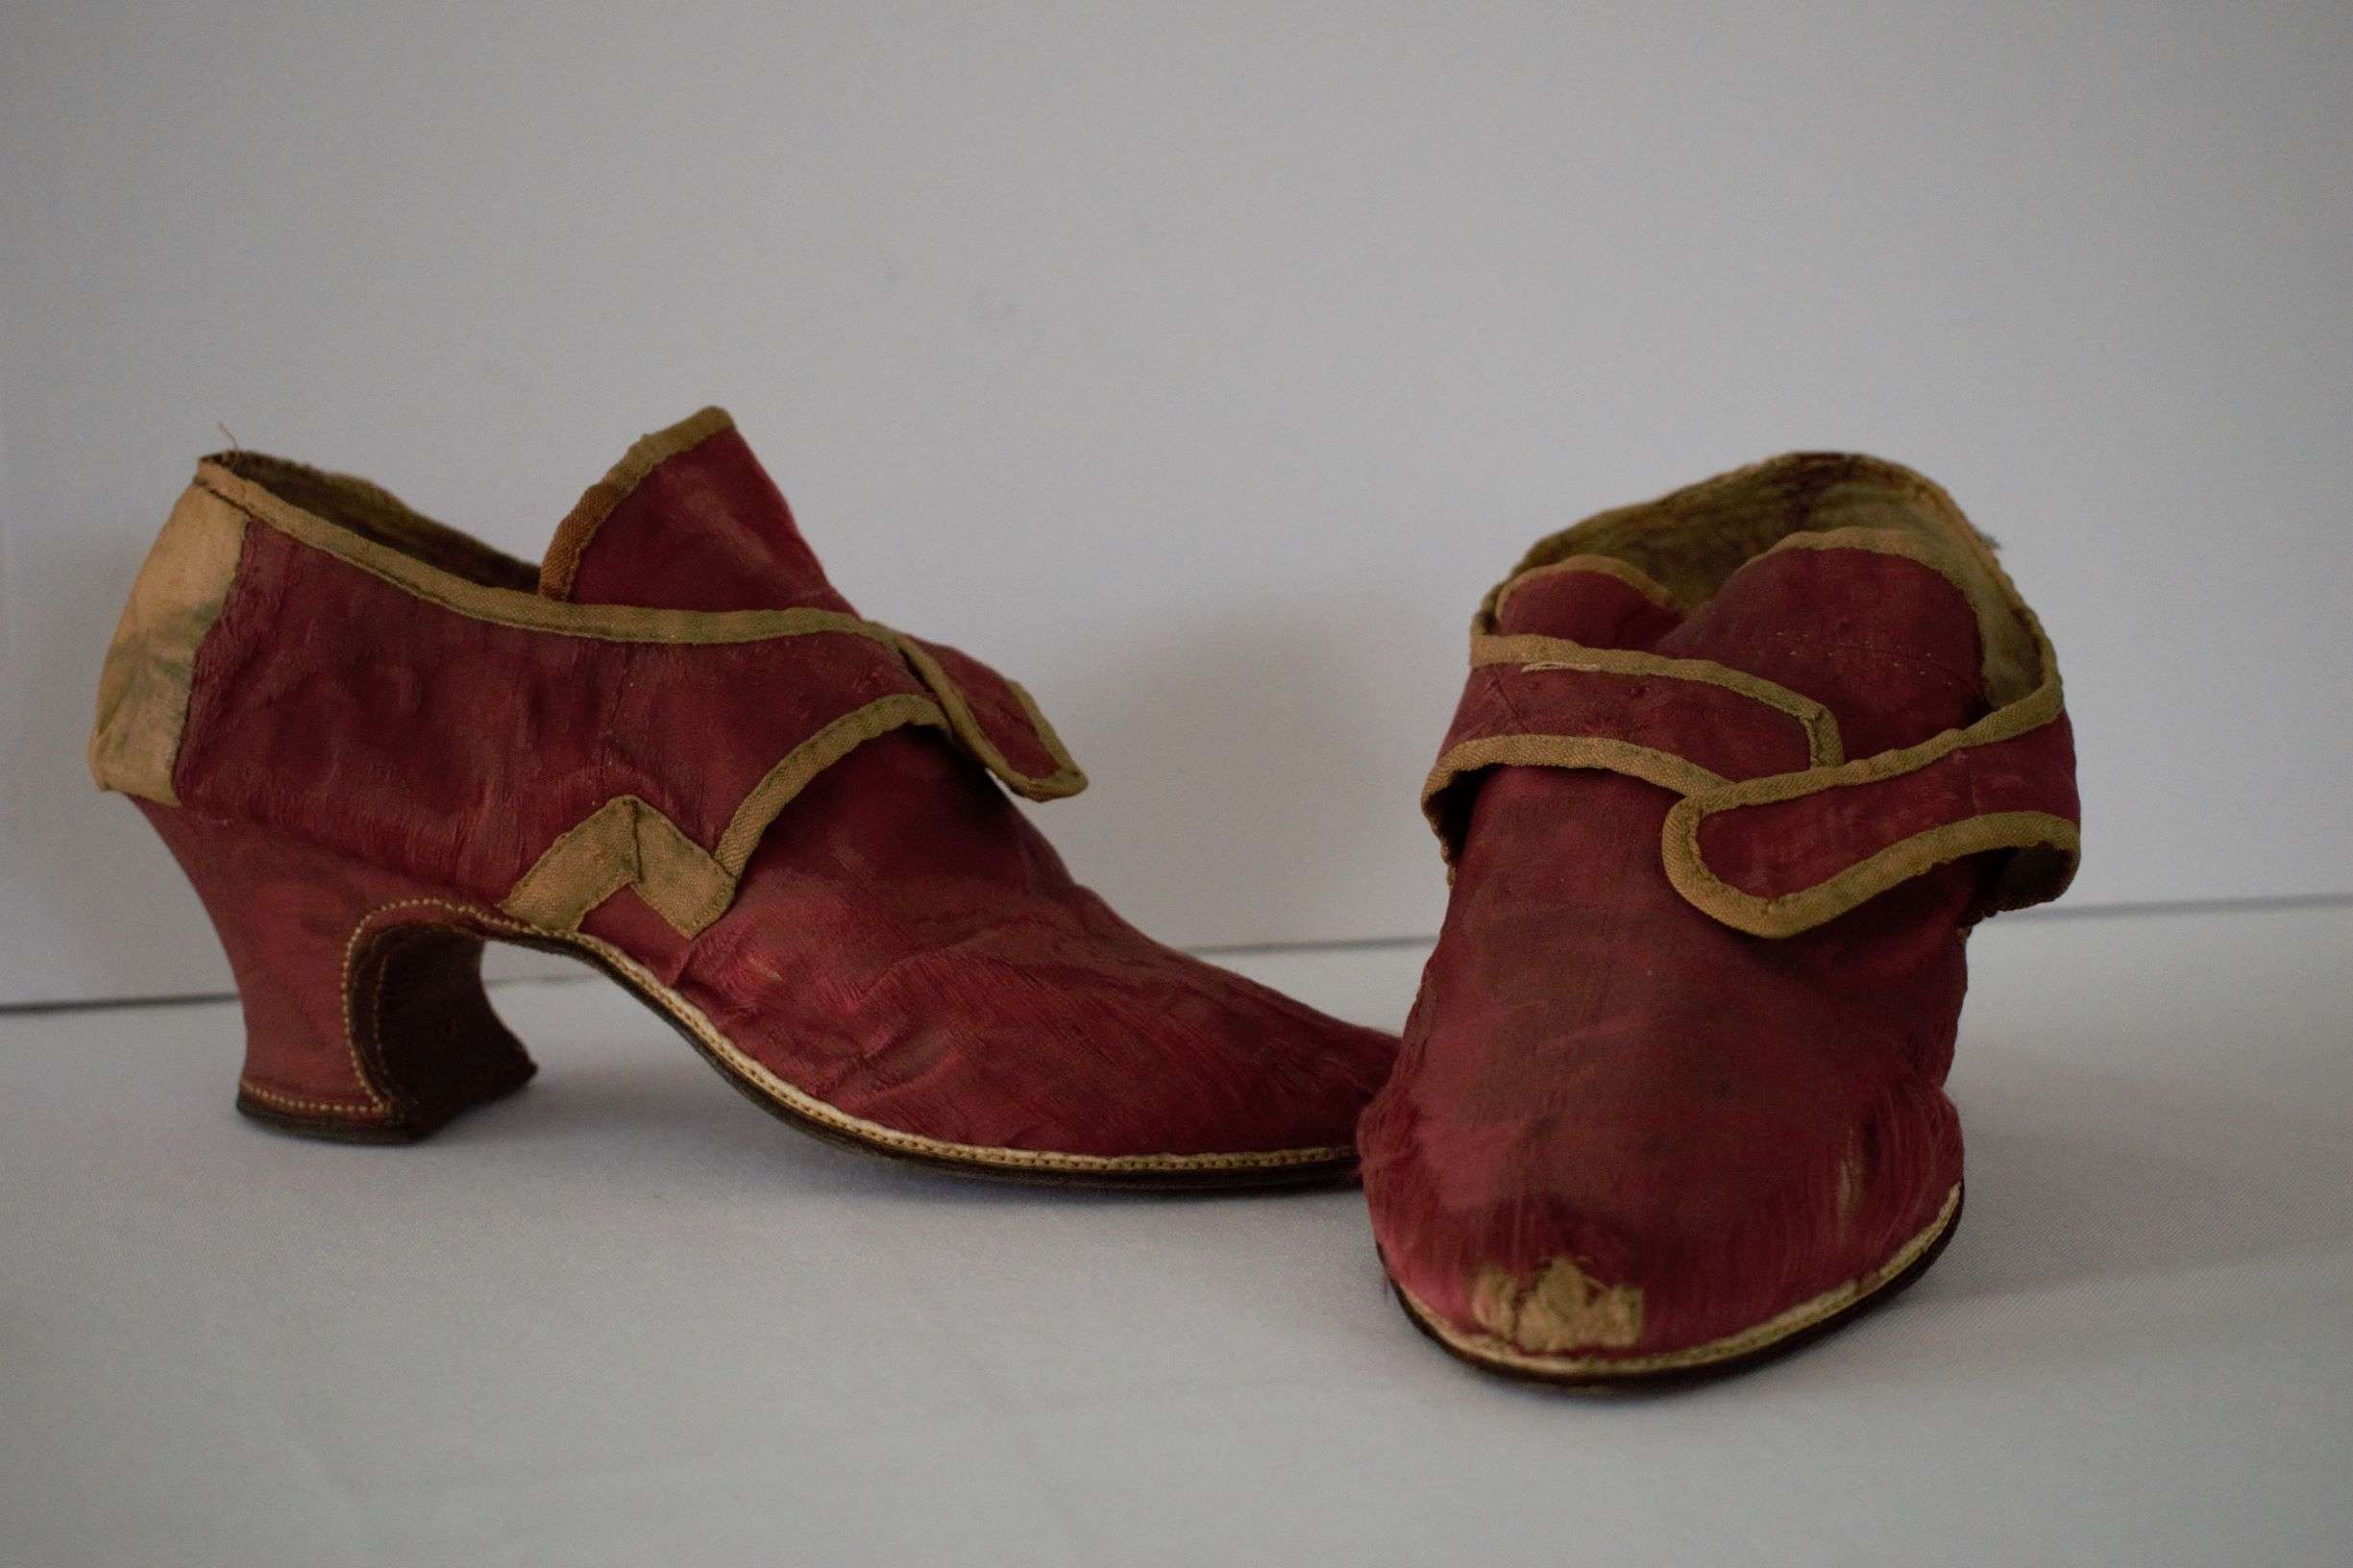 Shoes from the 1700s